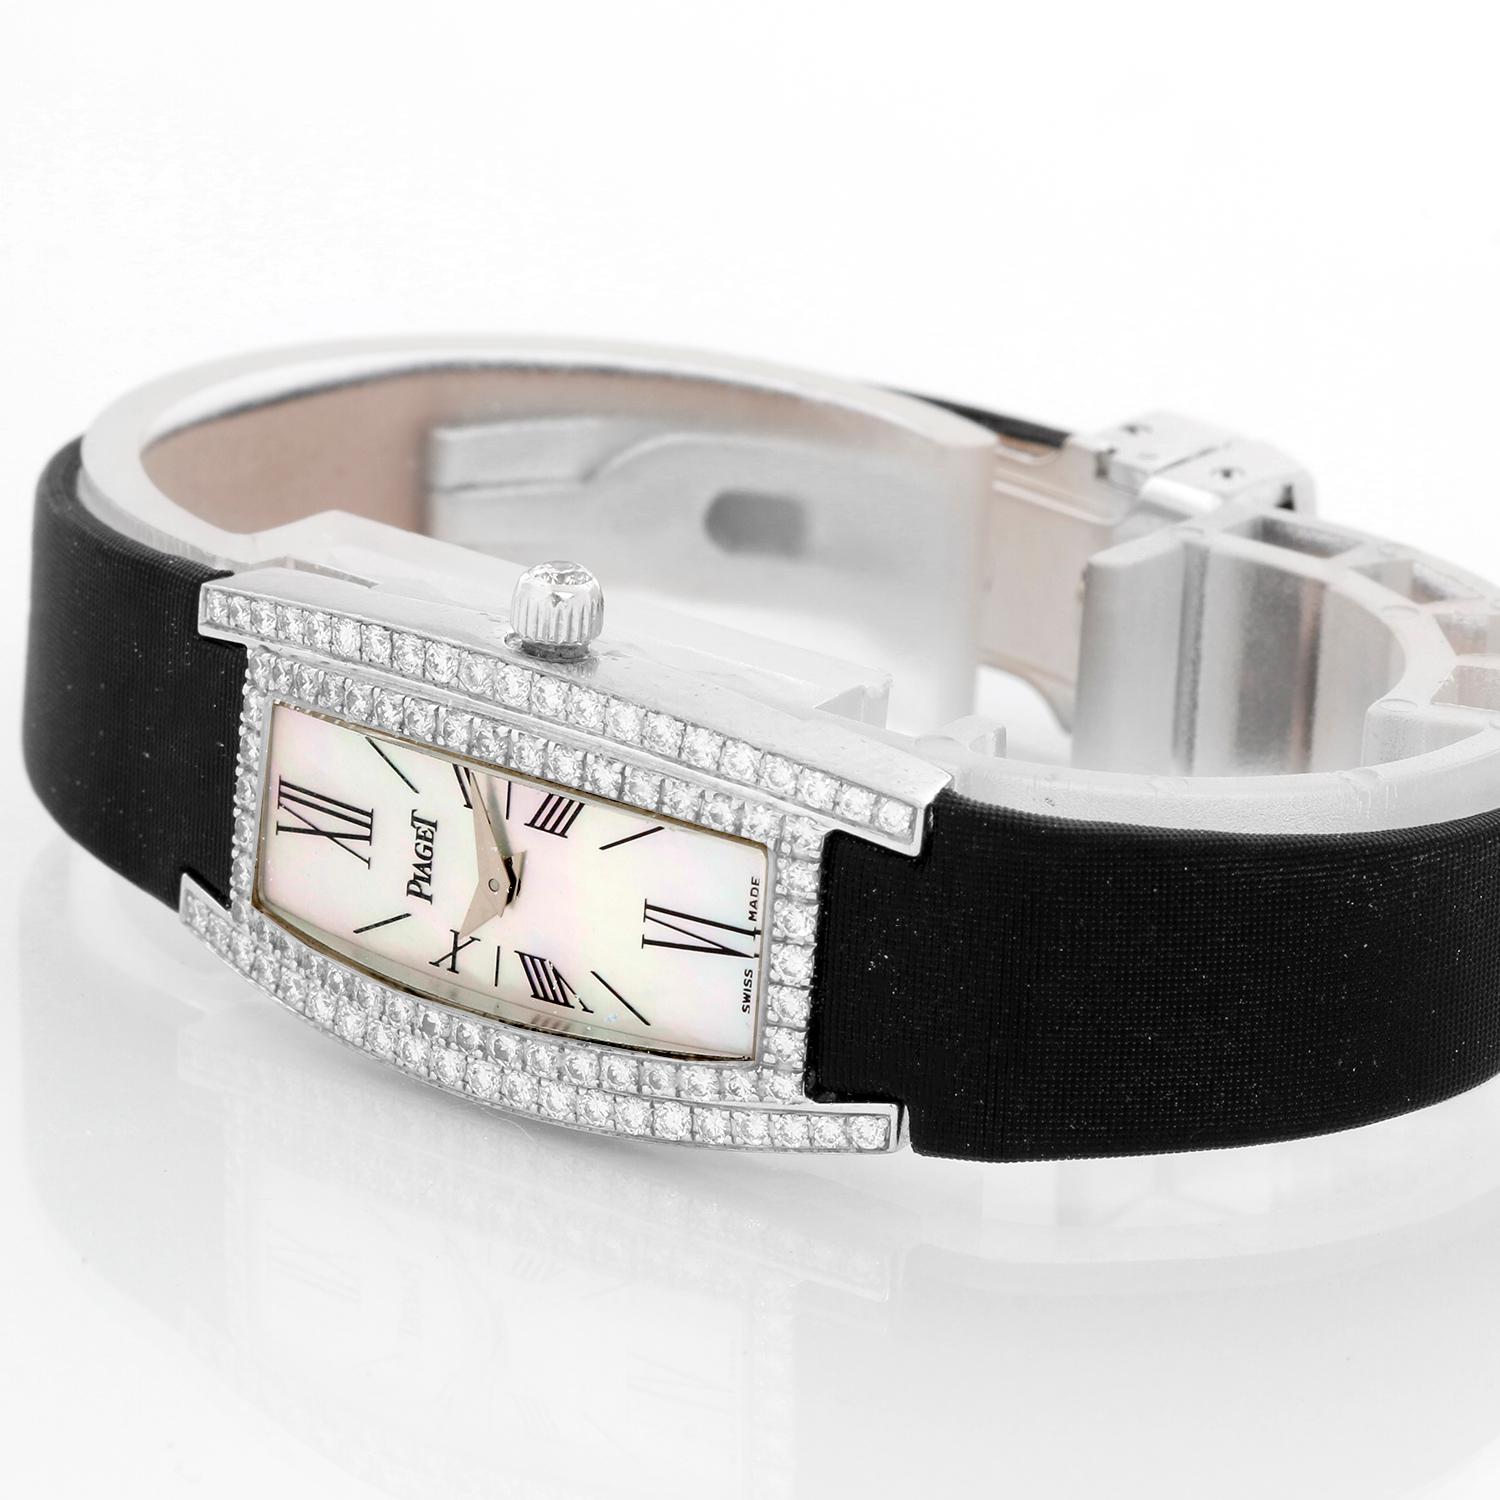 Piaget 18K White Gold Diamond Limelight Wrist Watch - Quartz. 18K White gold with diamond bezel ( 17 x 32 mm ). Mother of Pearl Piaget dial. Piasoie strap with diamond buckle. Pre-owned with Piaget box .